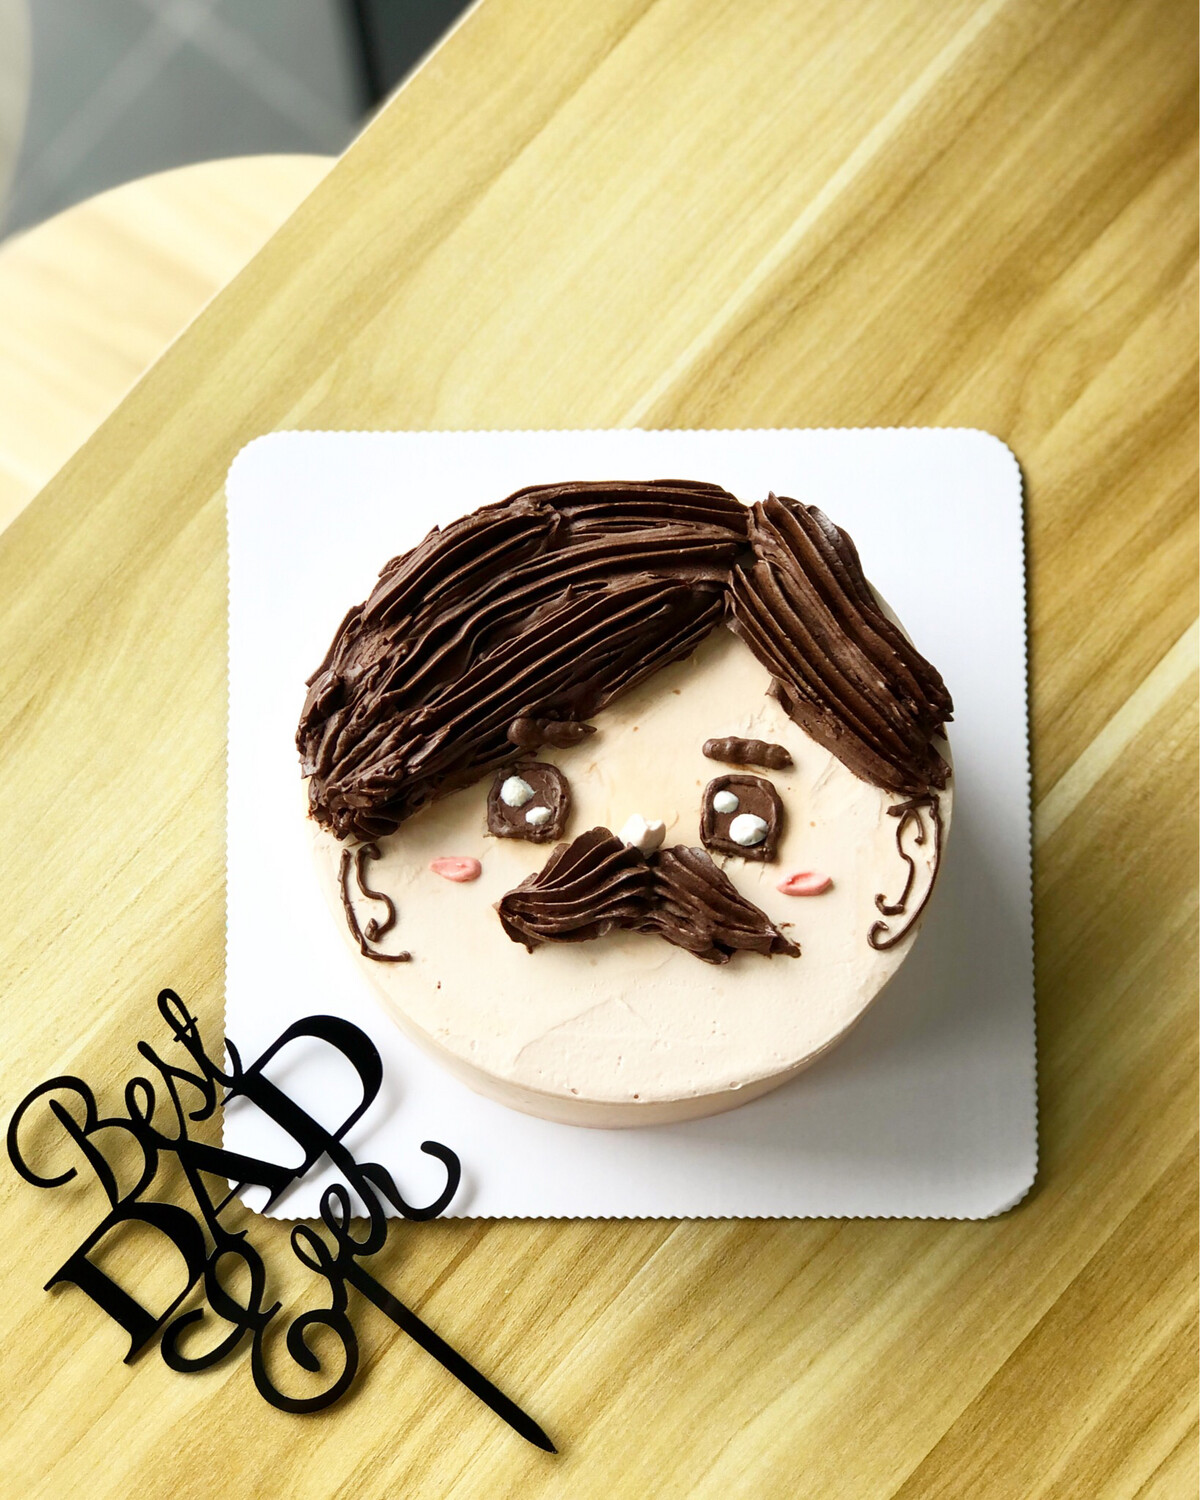 Fathers’ Day - Man / Dad / Father Face Cake